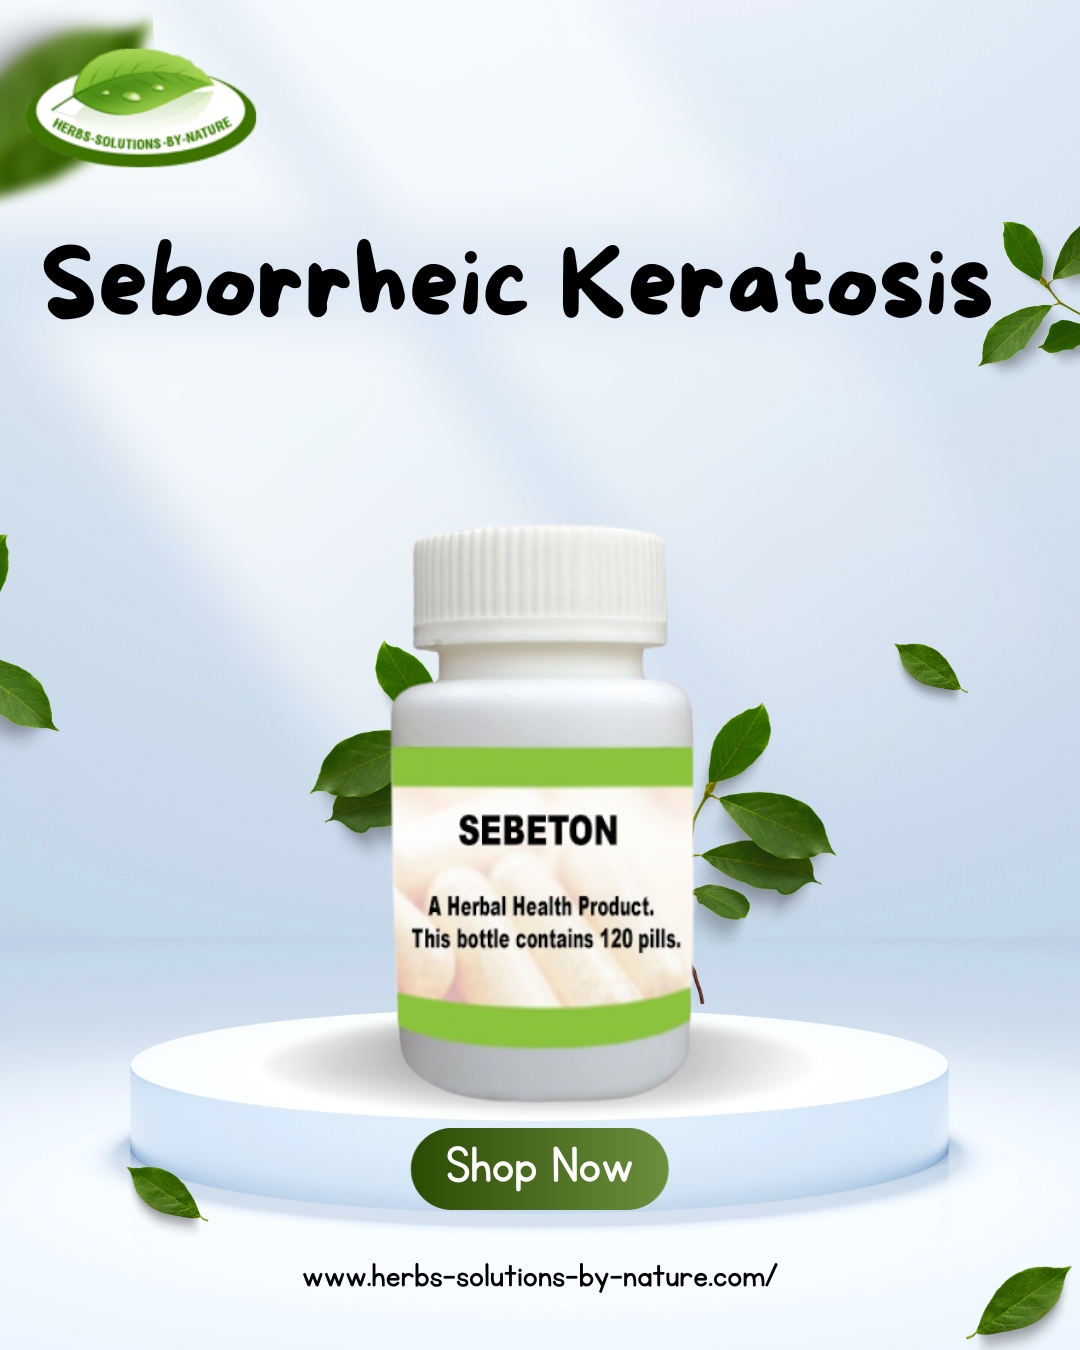 Is Seborrheic Keratosis Bothering You? Here's How Castor Oil Can Help